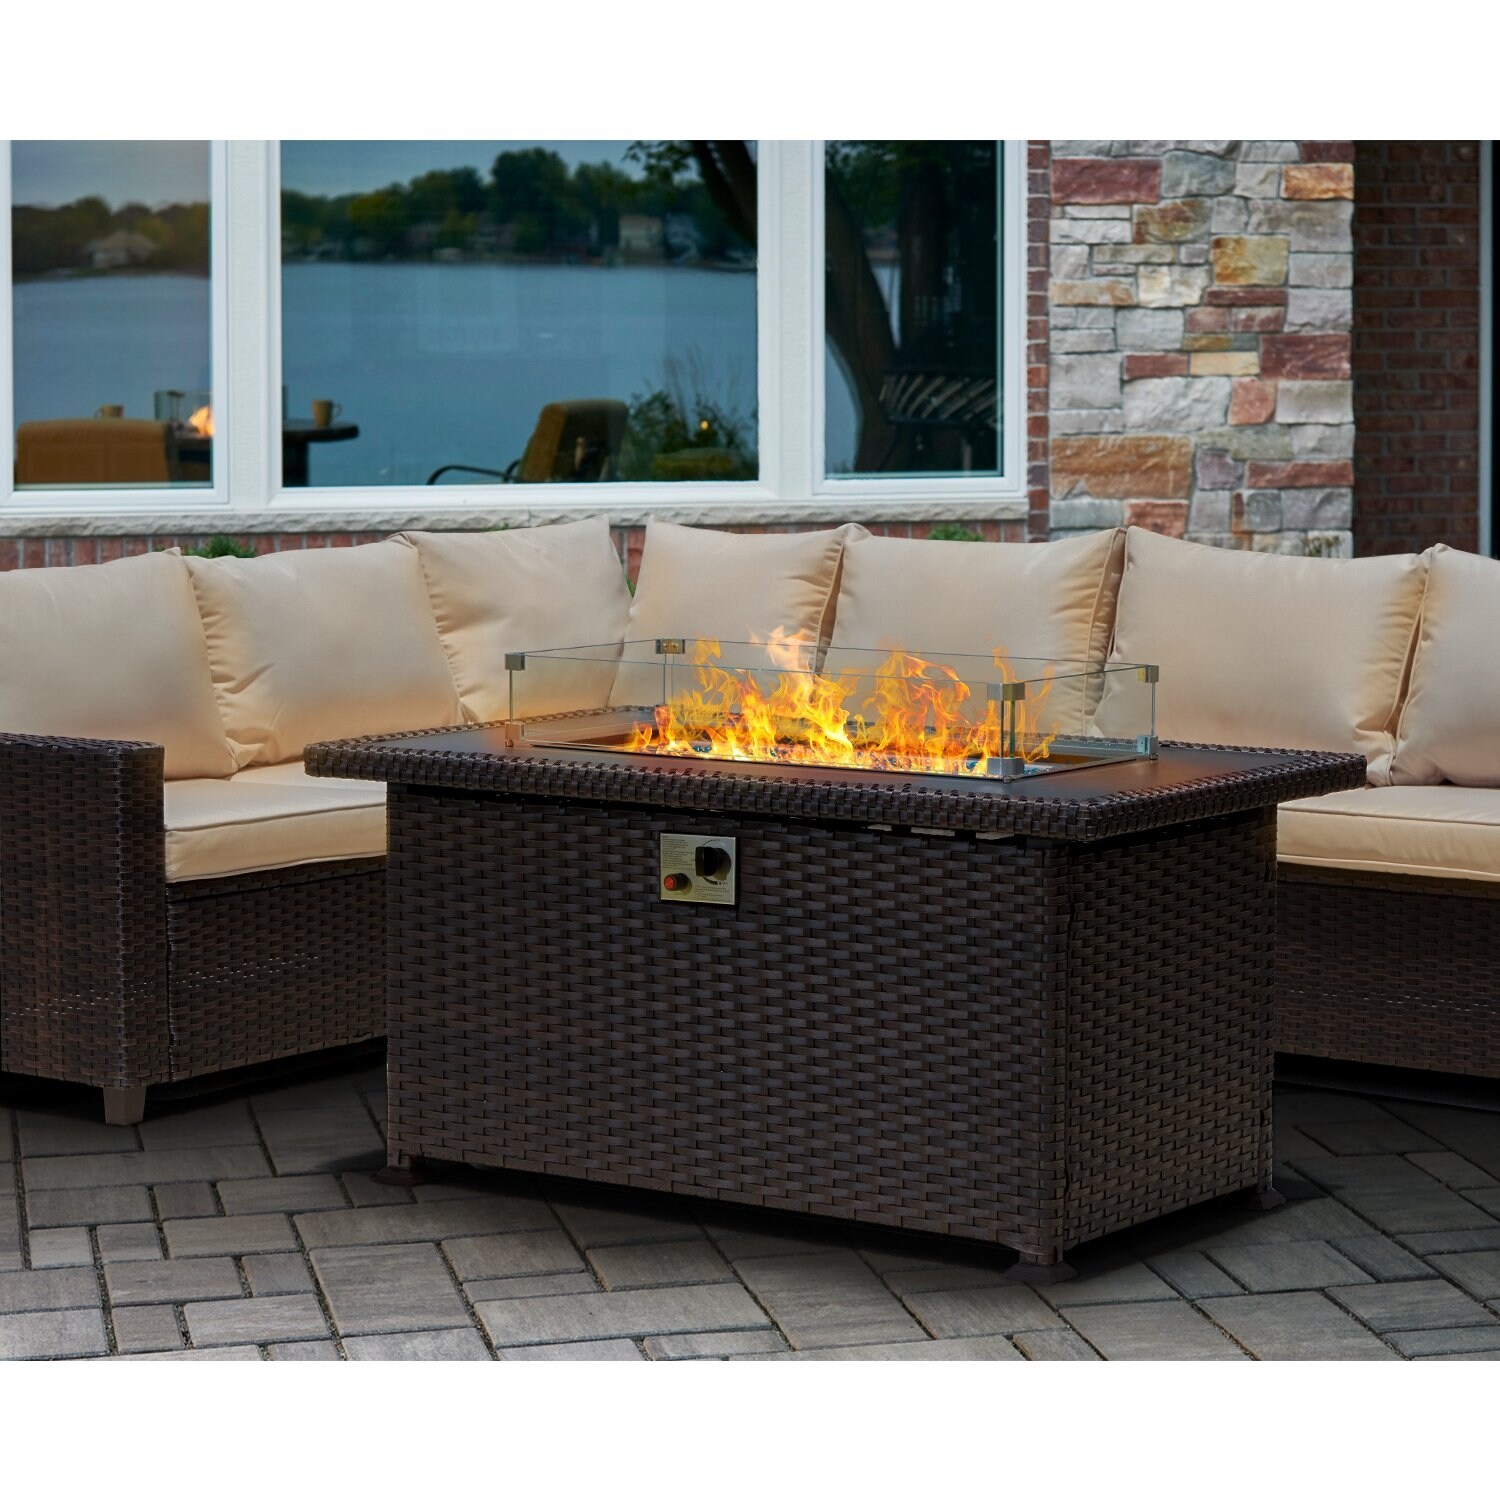 EROMMY Propane Fire Pit Table, 50,000 BTU Staninless Steel Gas Fire Pit